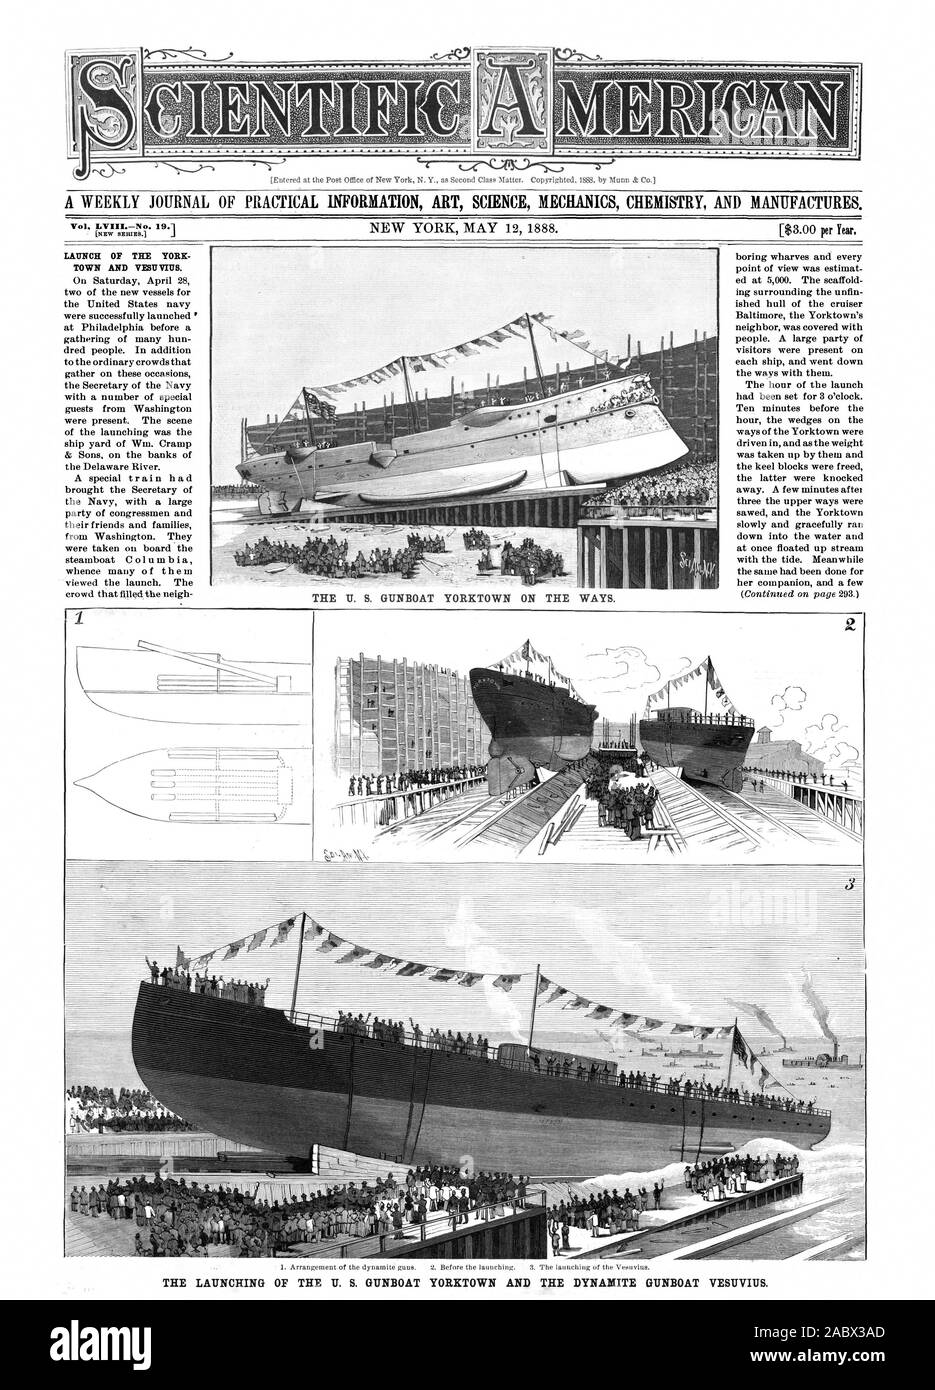 THE LAUNCHING OF THE U. S. GUNBOAT YORKTOWN AND THE DYNAMITE GUNBOAT VESUVIUS., scientific american, 1888-05-12 Stock Photo